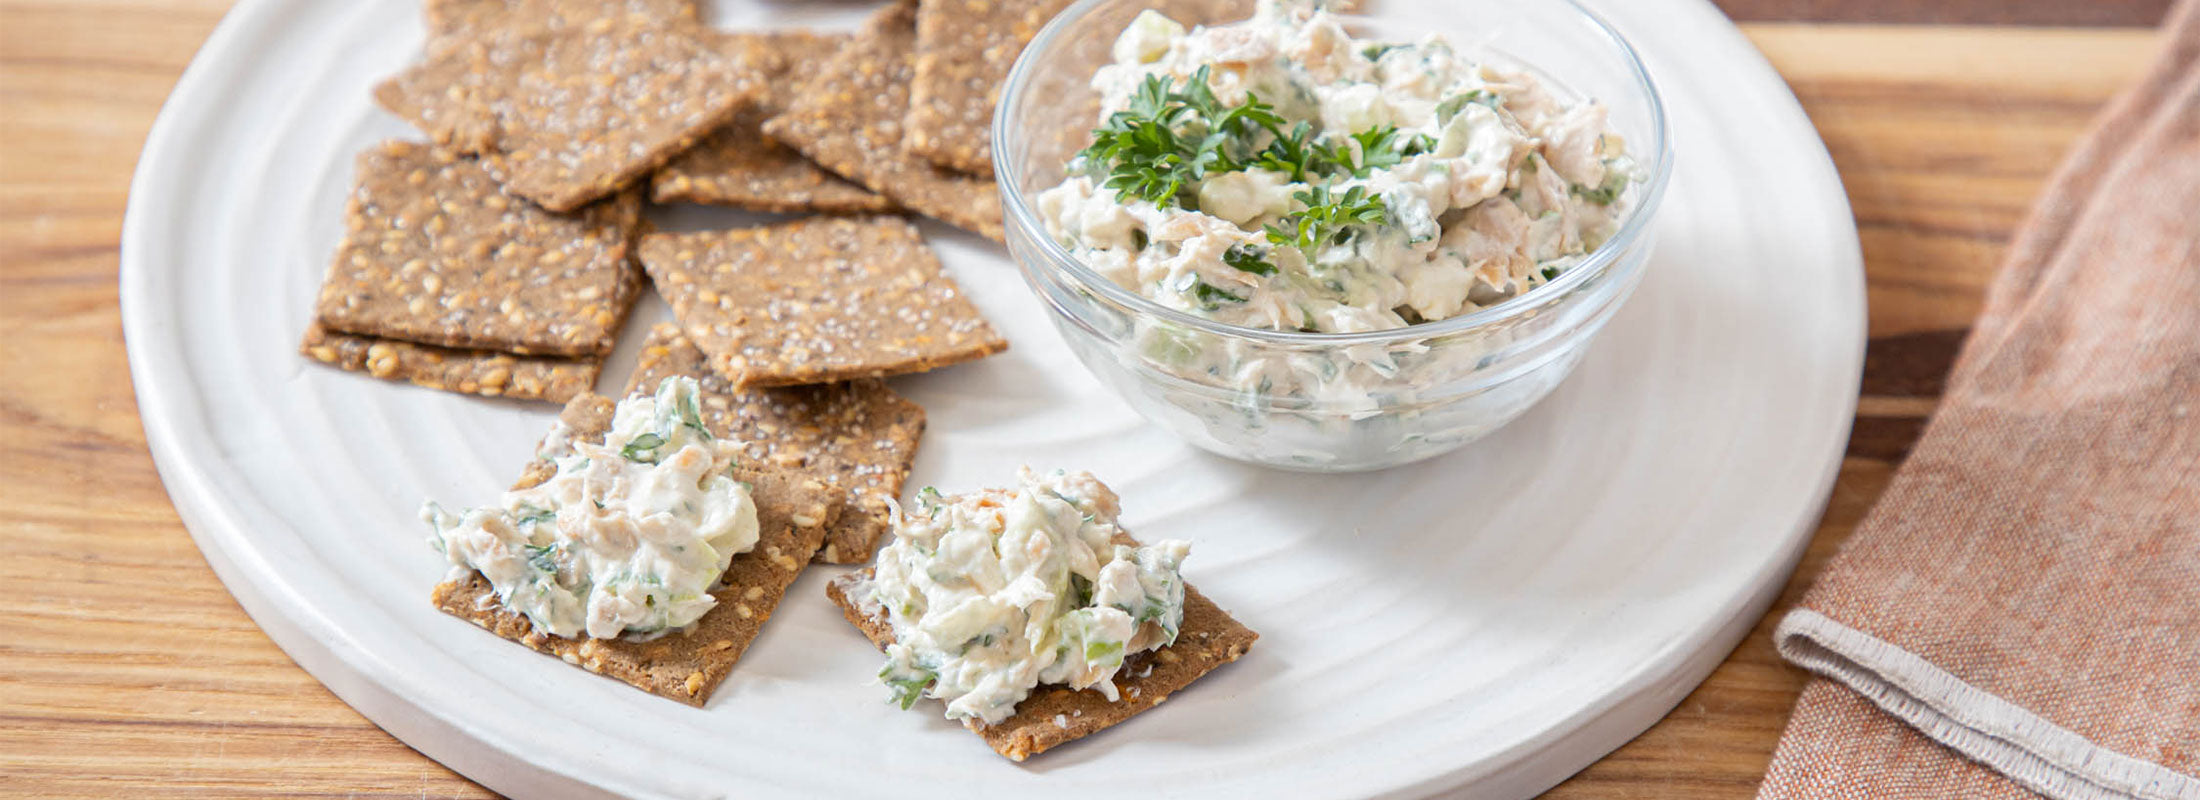 A small bowl of Wild Salmon Spread made with Patagonia Provisions' Wild Pink Salmon rests on a white plate next to Breadfruit crackers topped with dip